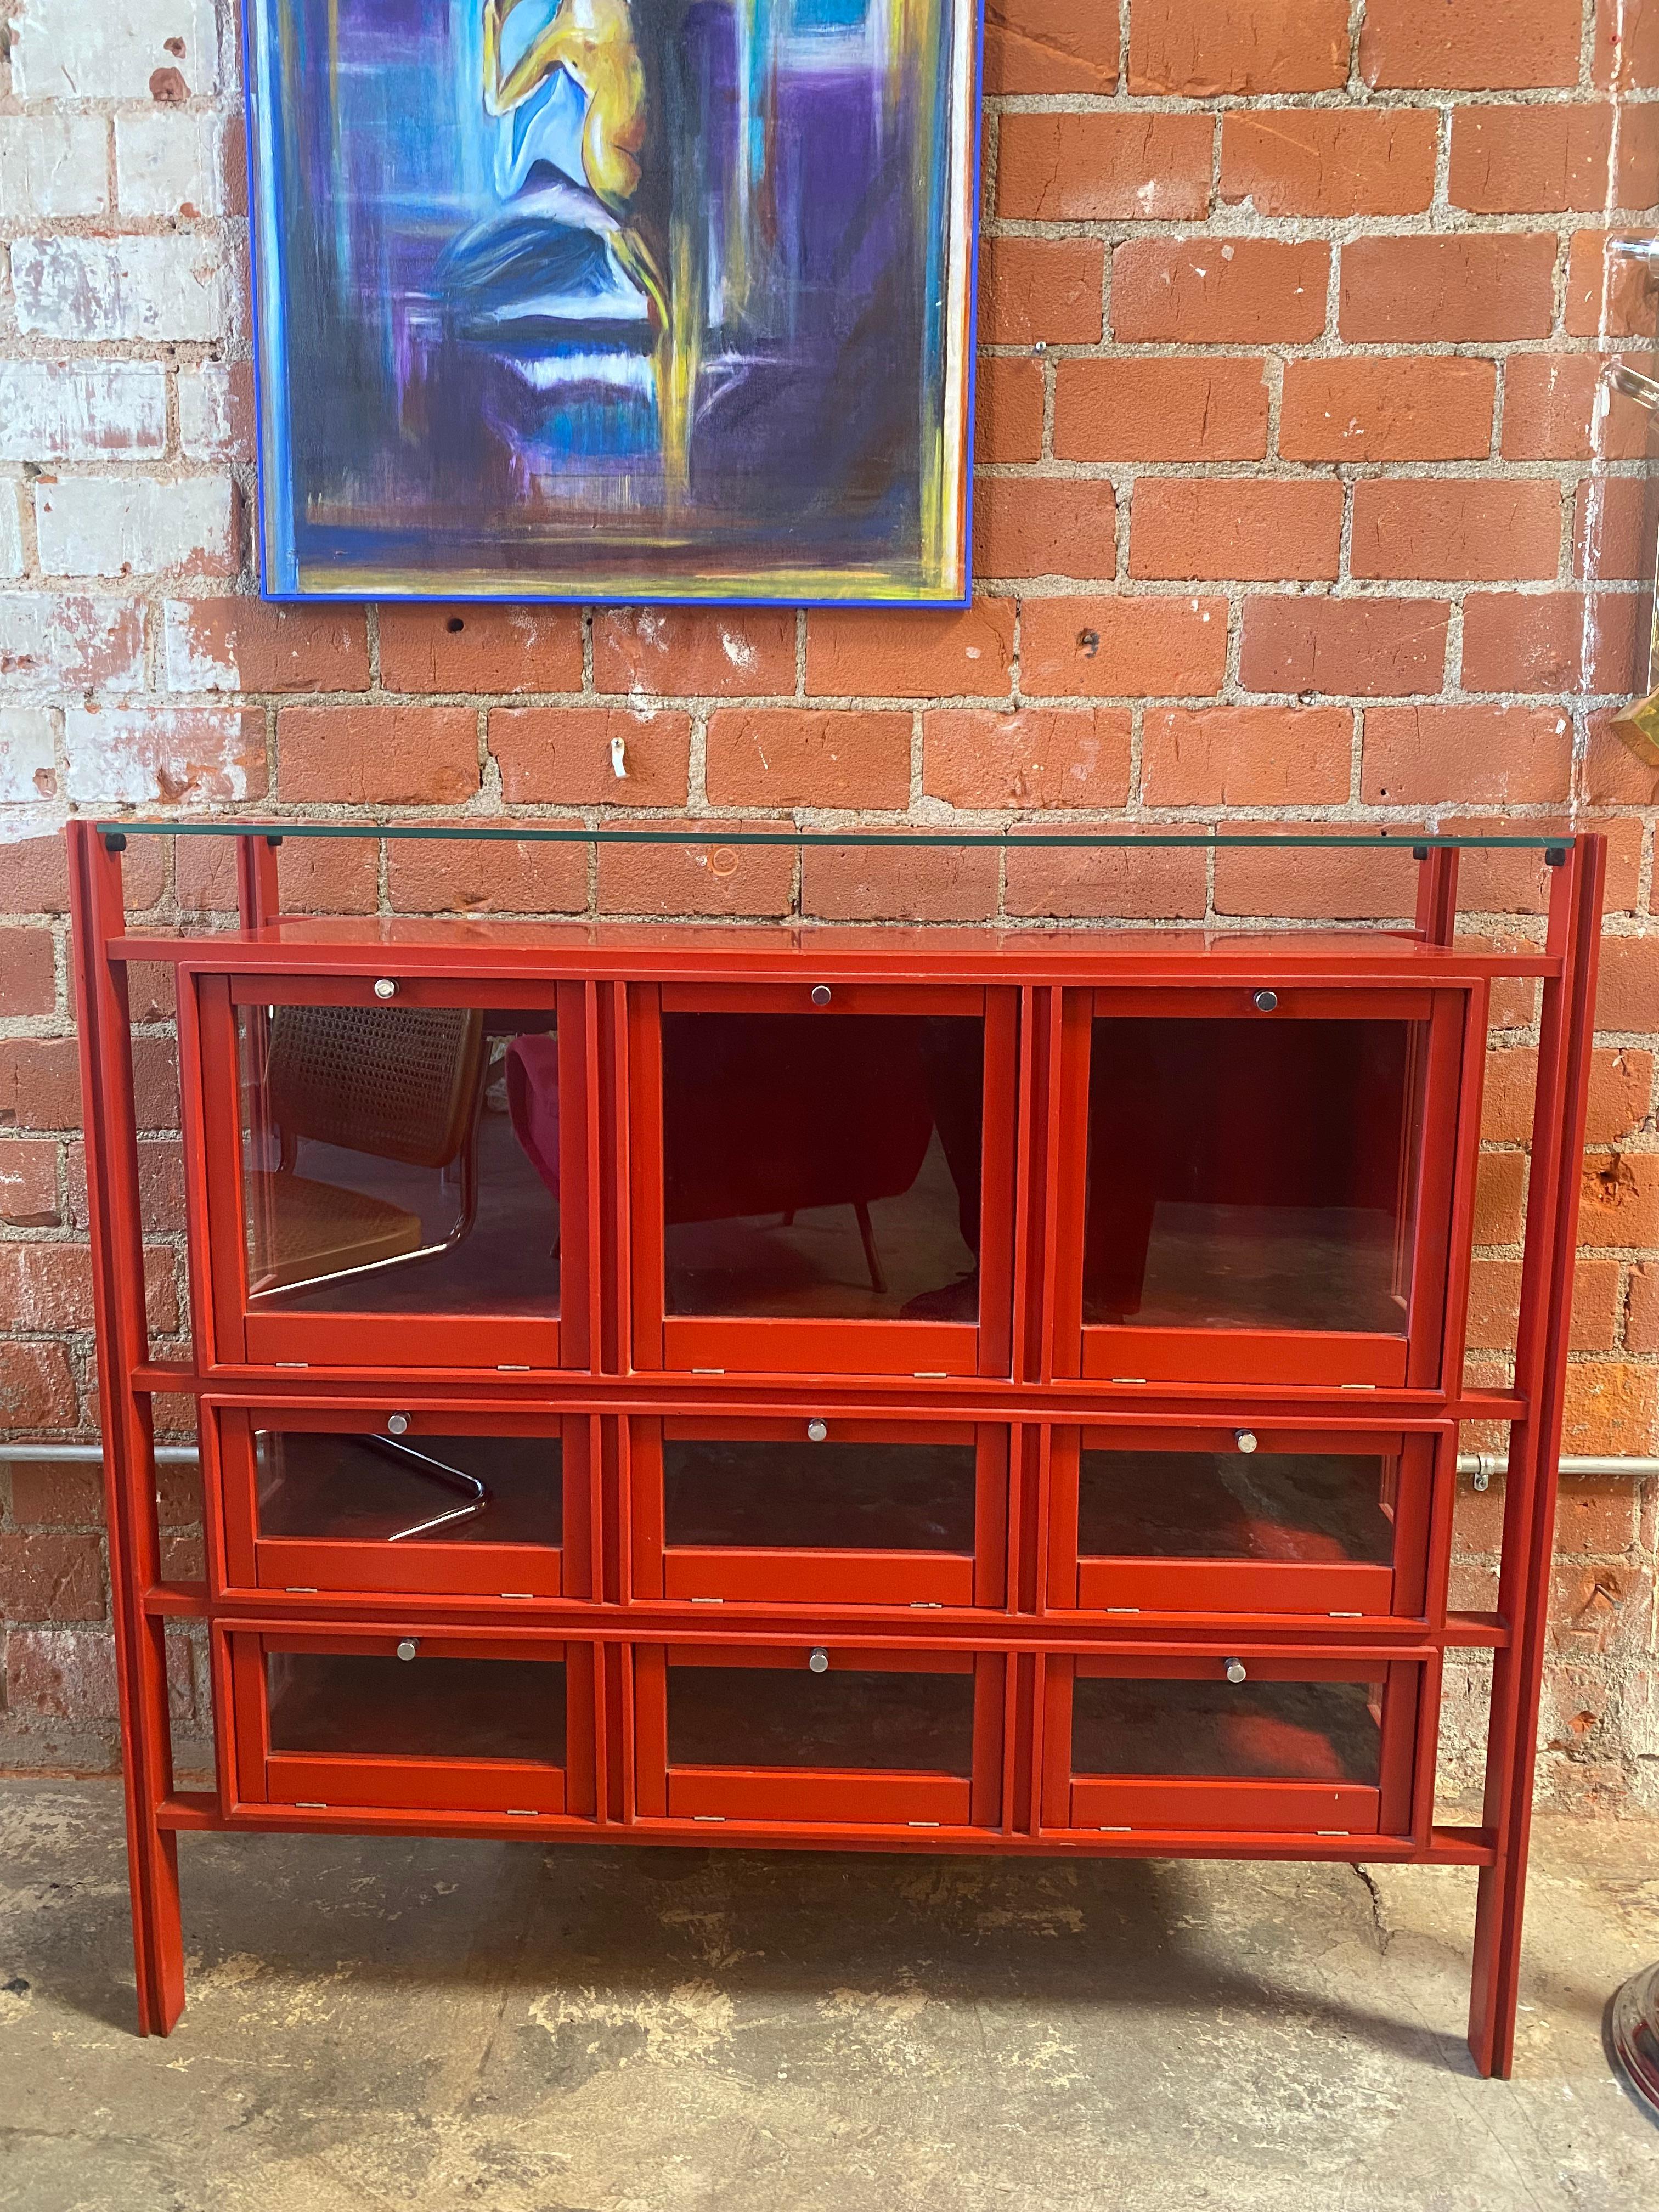 Extraordinary and rare Carlo de Carli Credenza/Cabinet with orthogonal frame in red lacquered wood, sides with transparent glass insert, flap doors with lacquered wood and crystal frame, upper top in ground glass. Year 1950. Original project for the